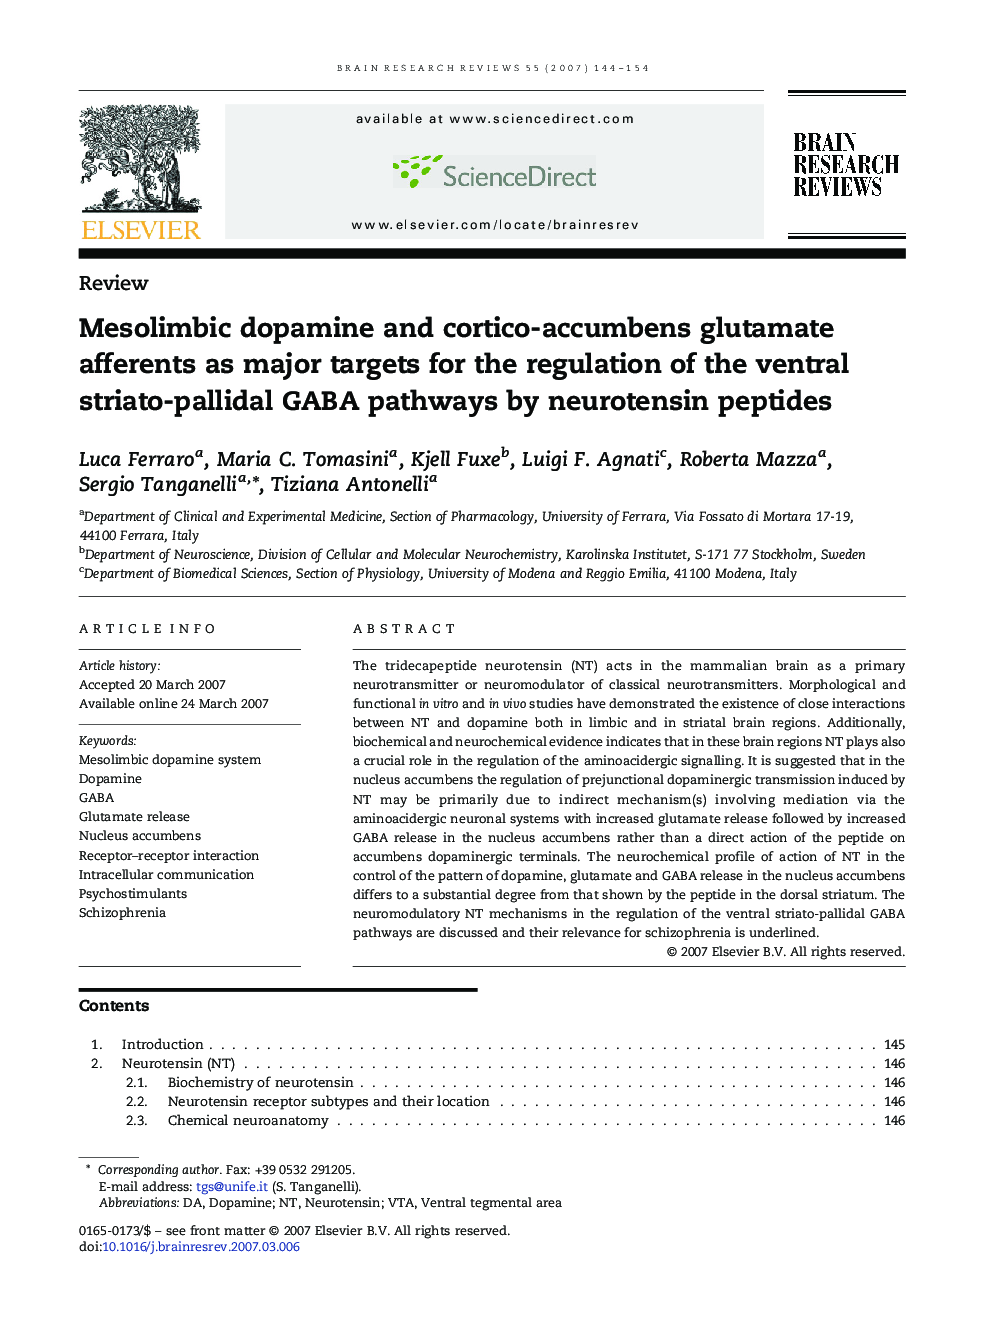 Mesolimbic dopamine and cortico-accumbens glutamate afferents as major targets for the regulation of the ventral striato-pallidal GABA pathways by neurotensin peptides